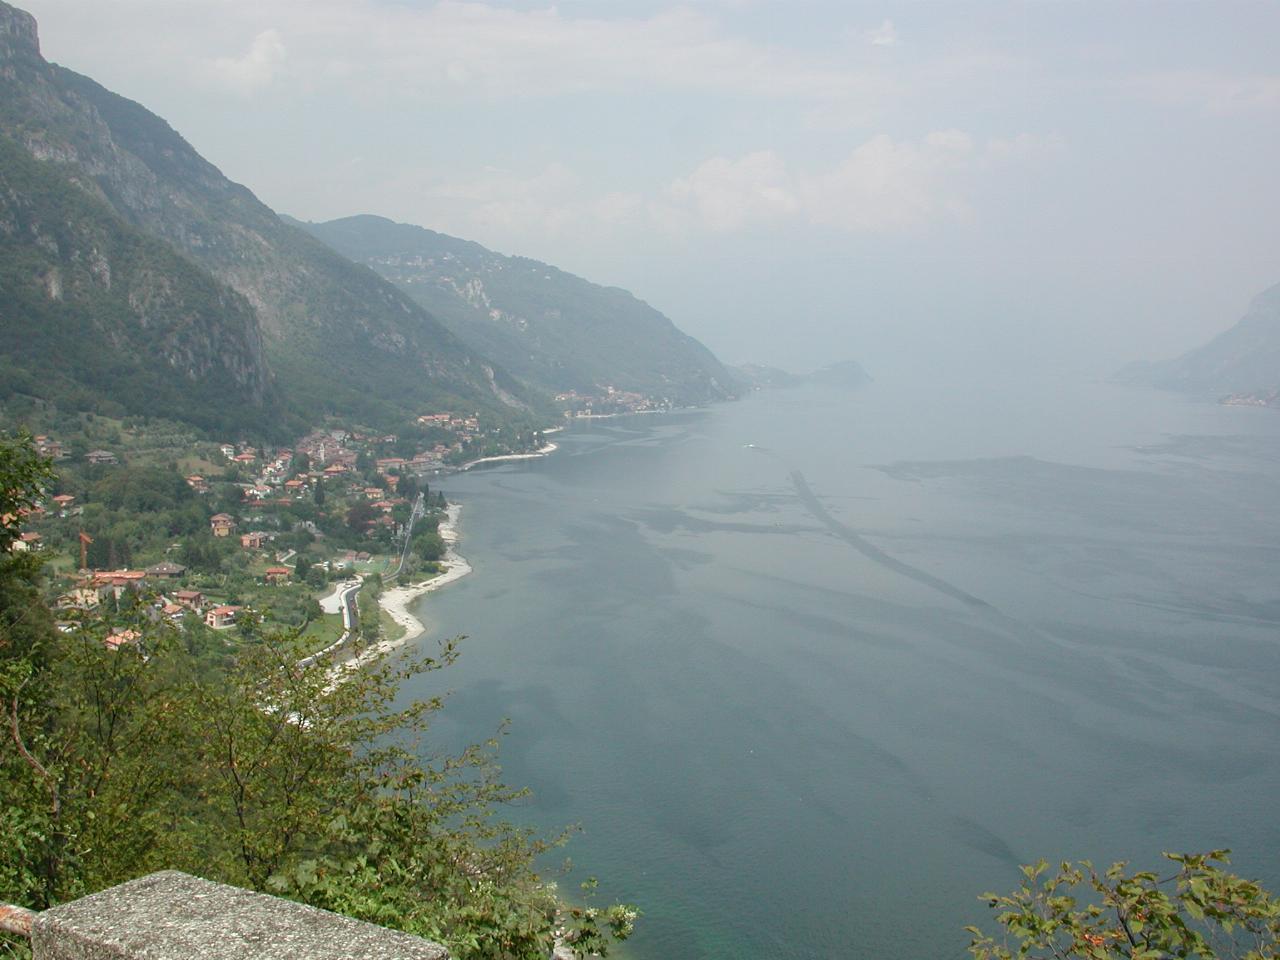 Lake Lecco from above the road above the western shore